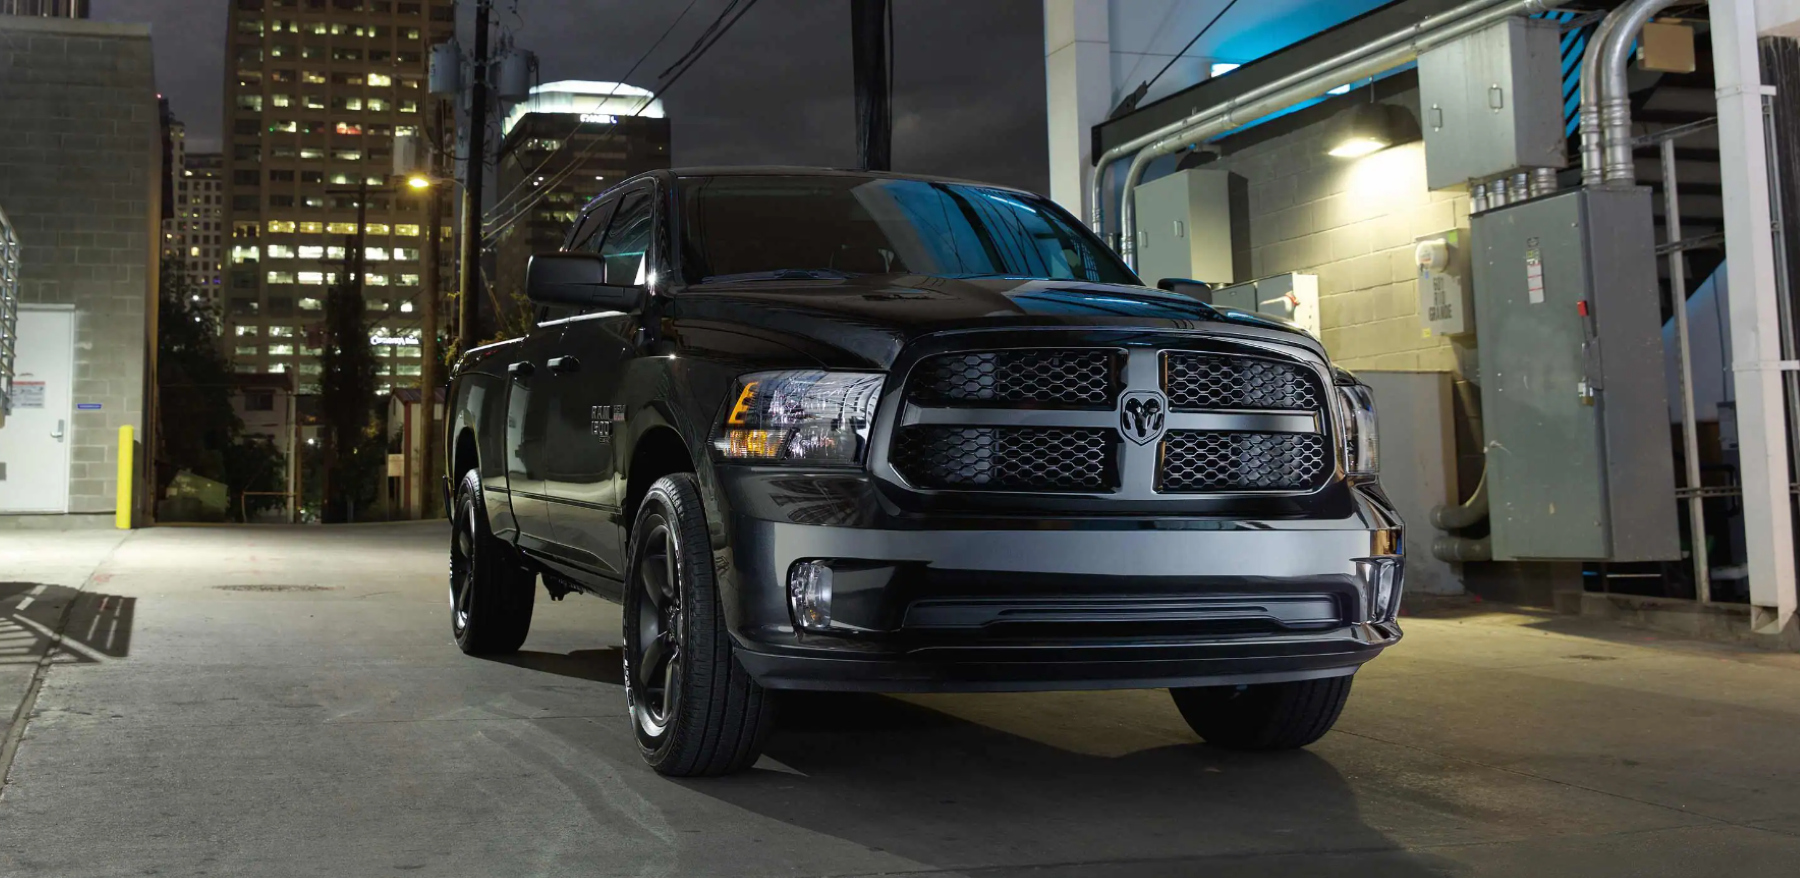 A black and gray Ram 1500 Classic full-size pickup truck parked near electrical maintenance equipment in a city at night